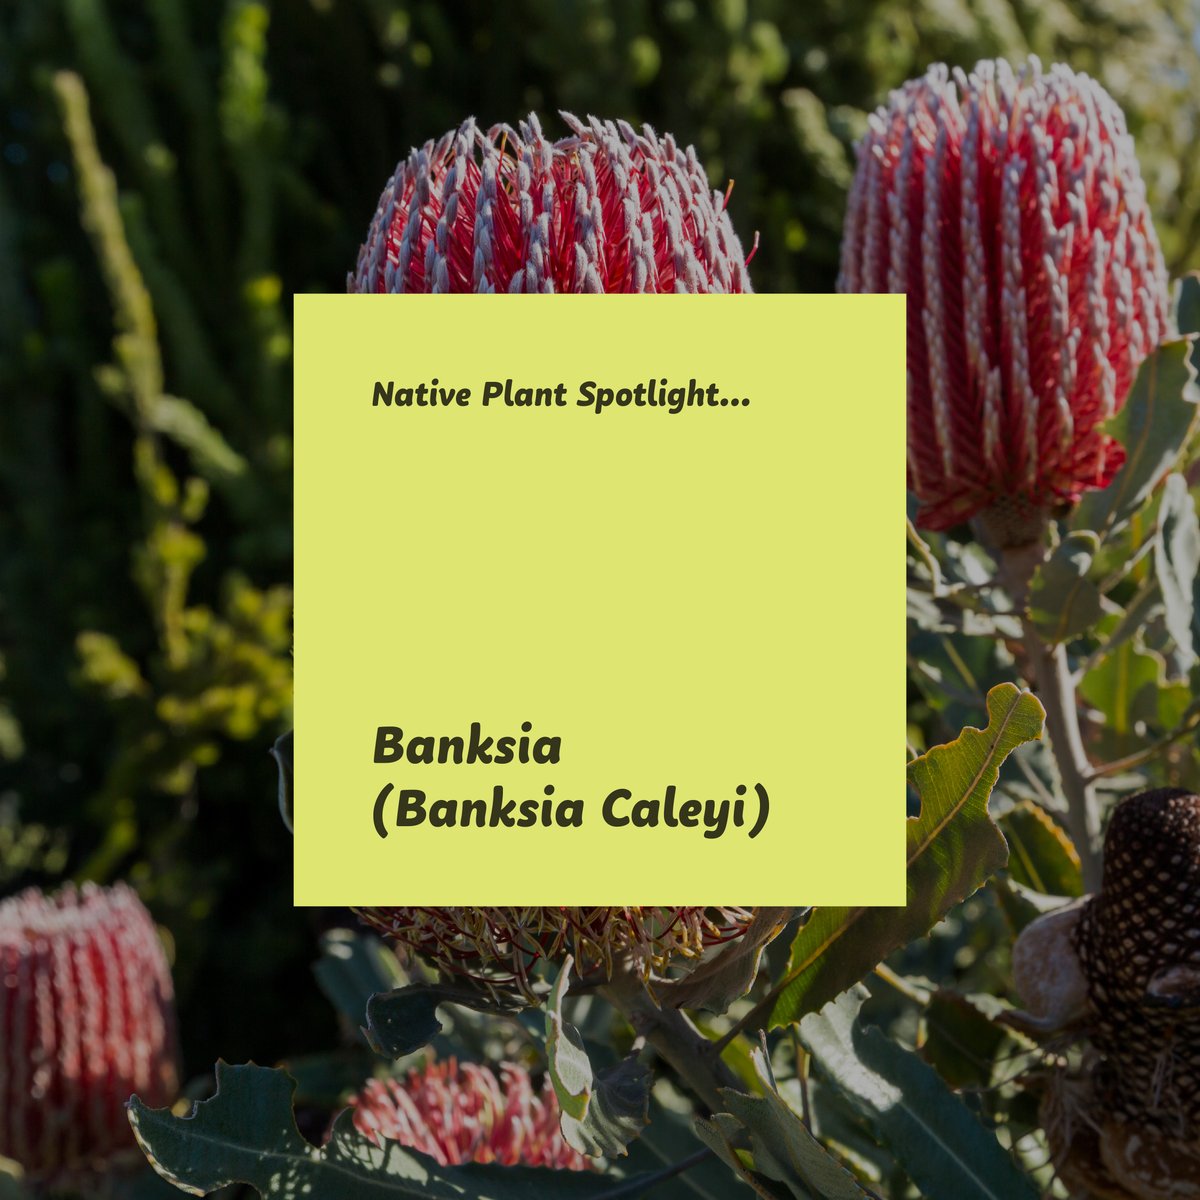 Banksia is beneficial for gardens due to its striking appearance, drought tolerance, and attraction to native wildlife. Its unique flowers provide nectar for birds and insects, while its deep roots help stabilise soil and prevent erosion.
#BanksiaGardens #DroughtTolerantPlants